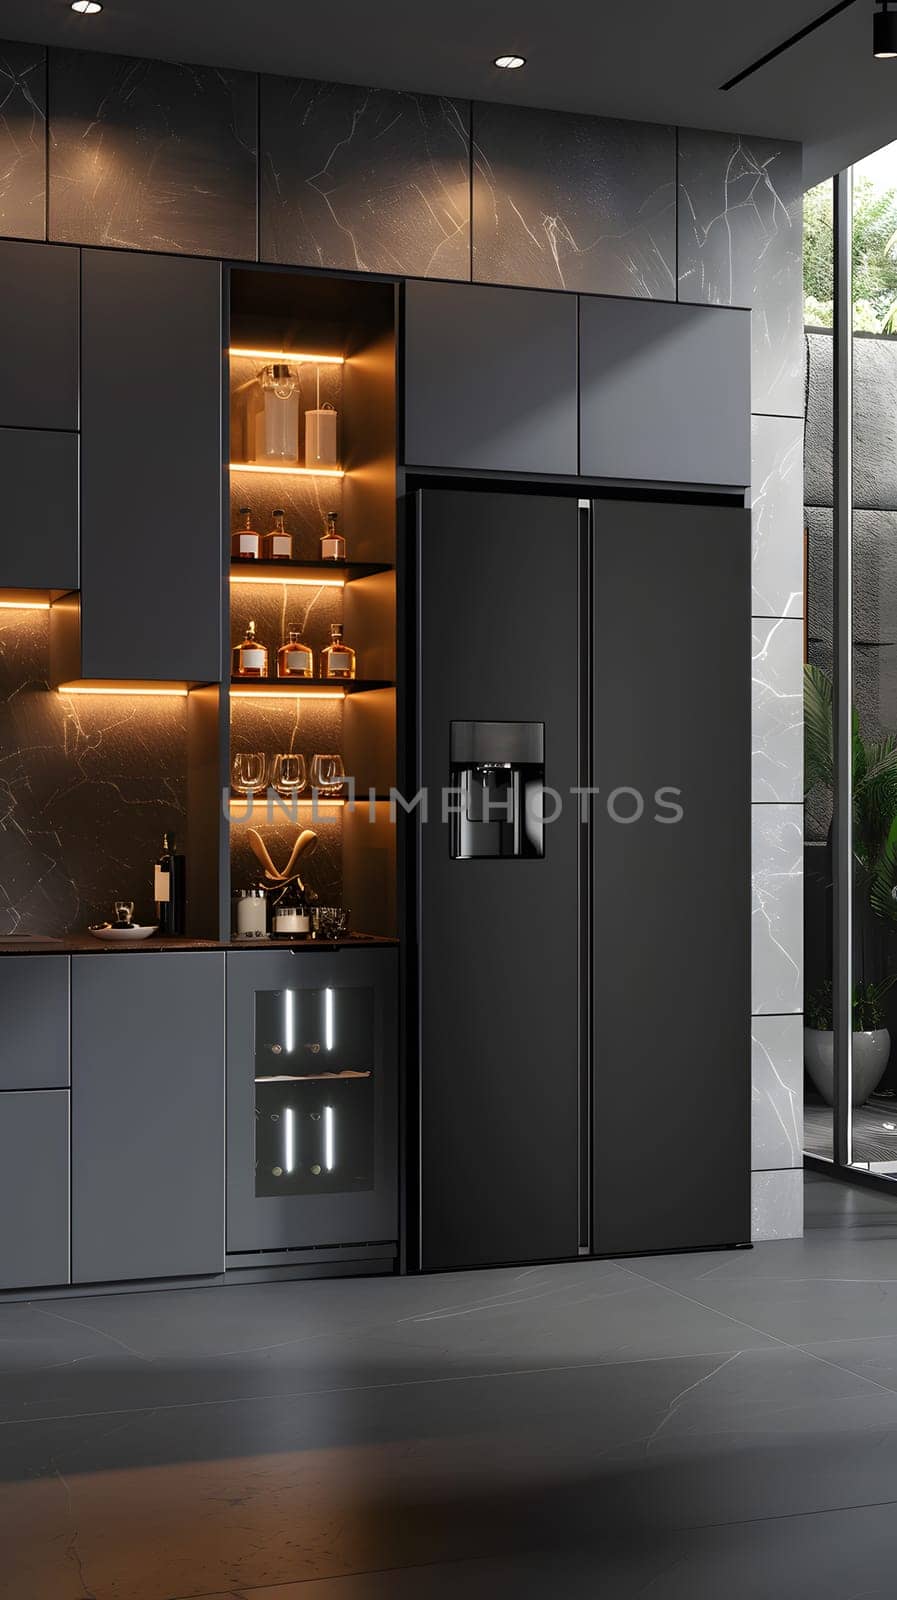 The kitchen features sleek black cabinetry and a matching refrigerator, seamlessly blending with the hardwood floors and large windows in the room